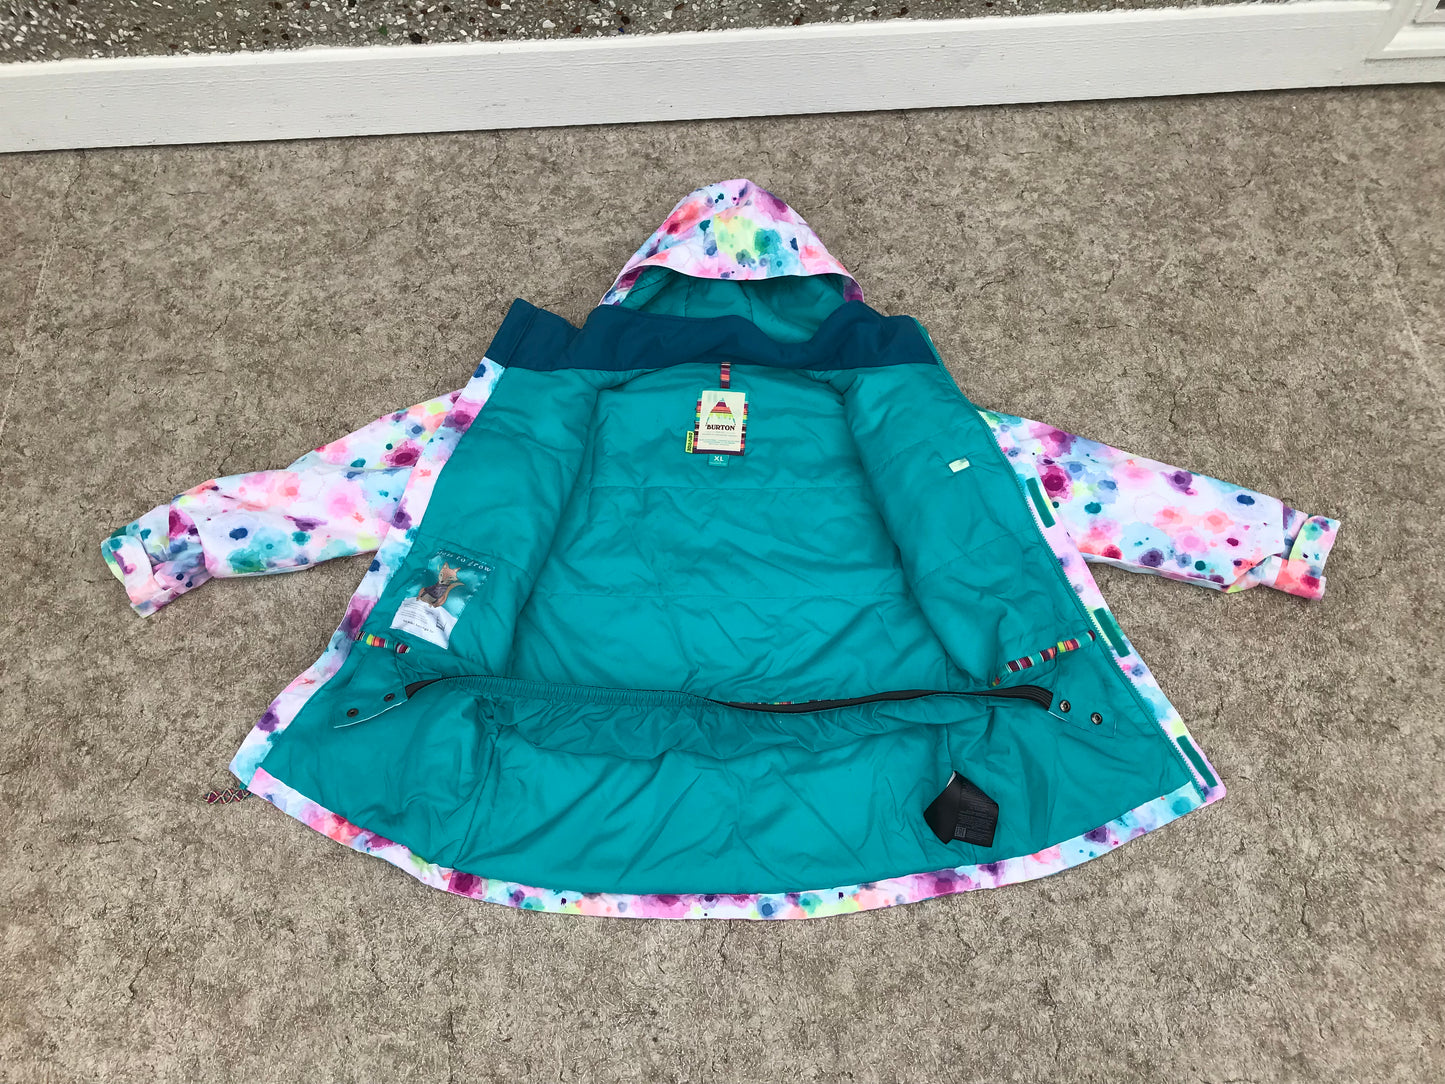 Winter Coat Child Size 14-16 X Large Burton With Snow Belt Pink Teal Multi Excellent